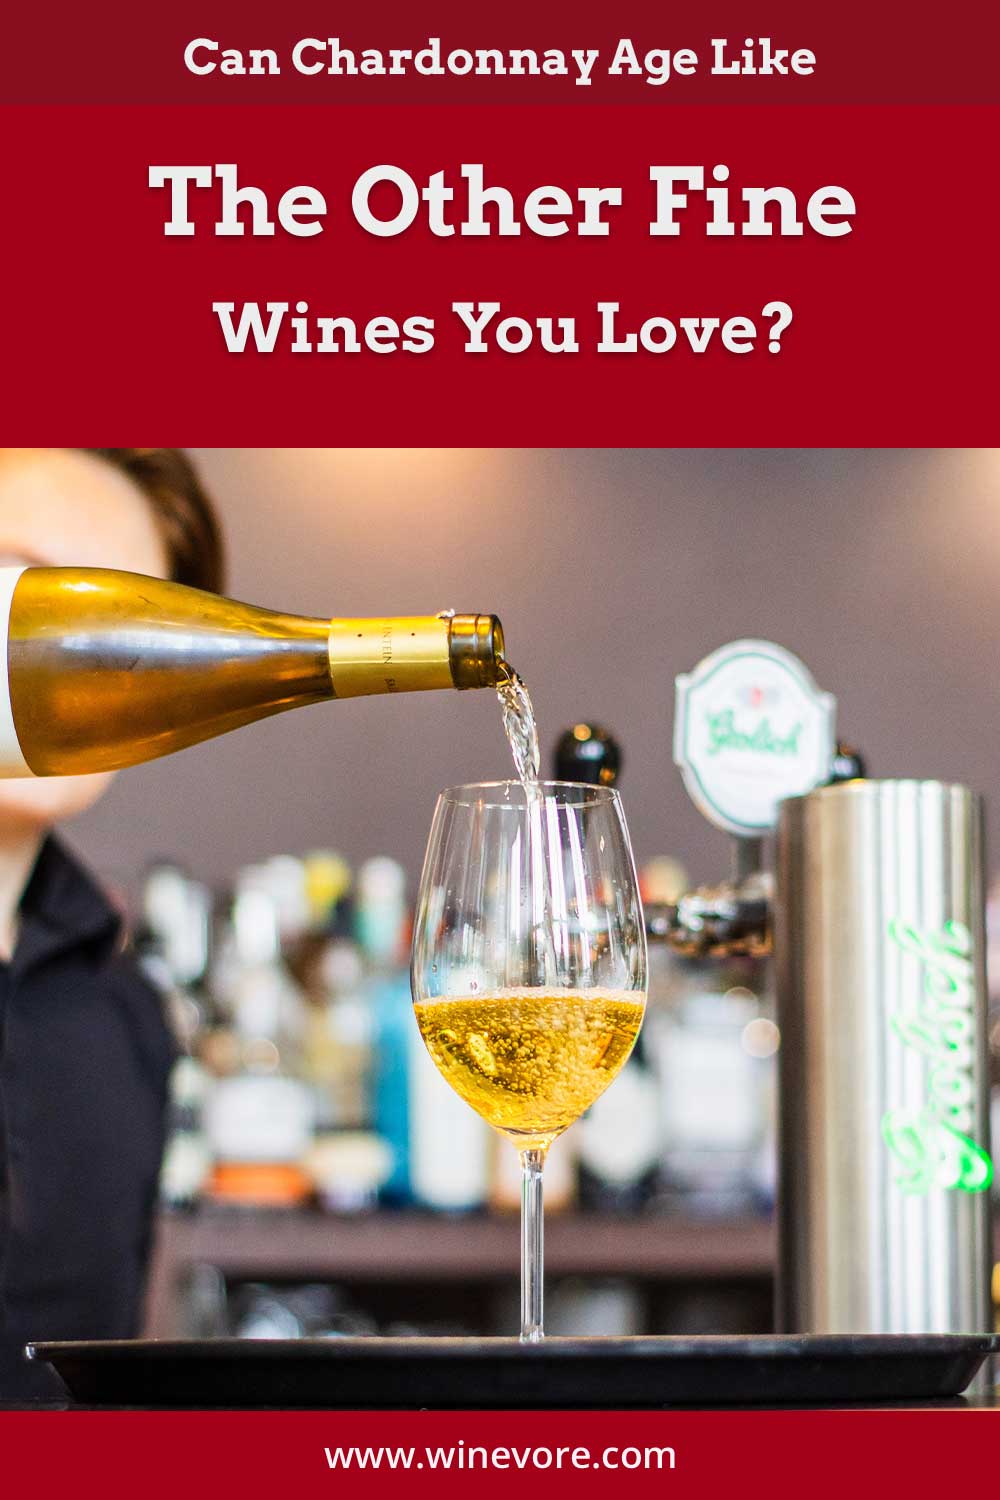 Pouring chardonnay into a glass - Can it Age Like The Other Fine Wines You Love?